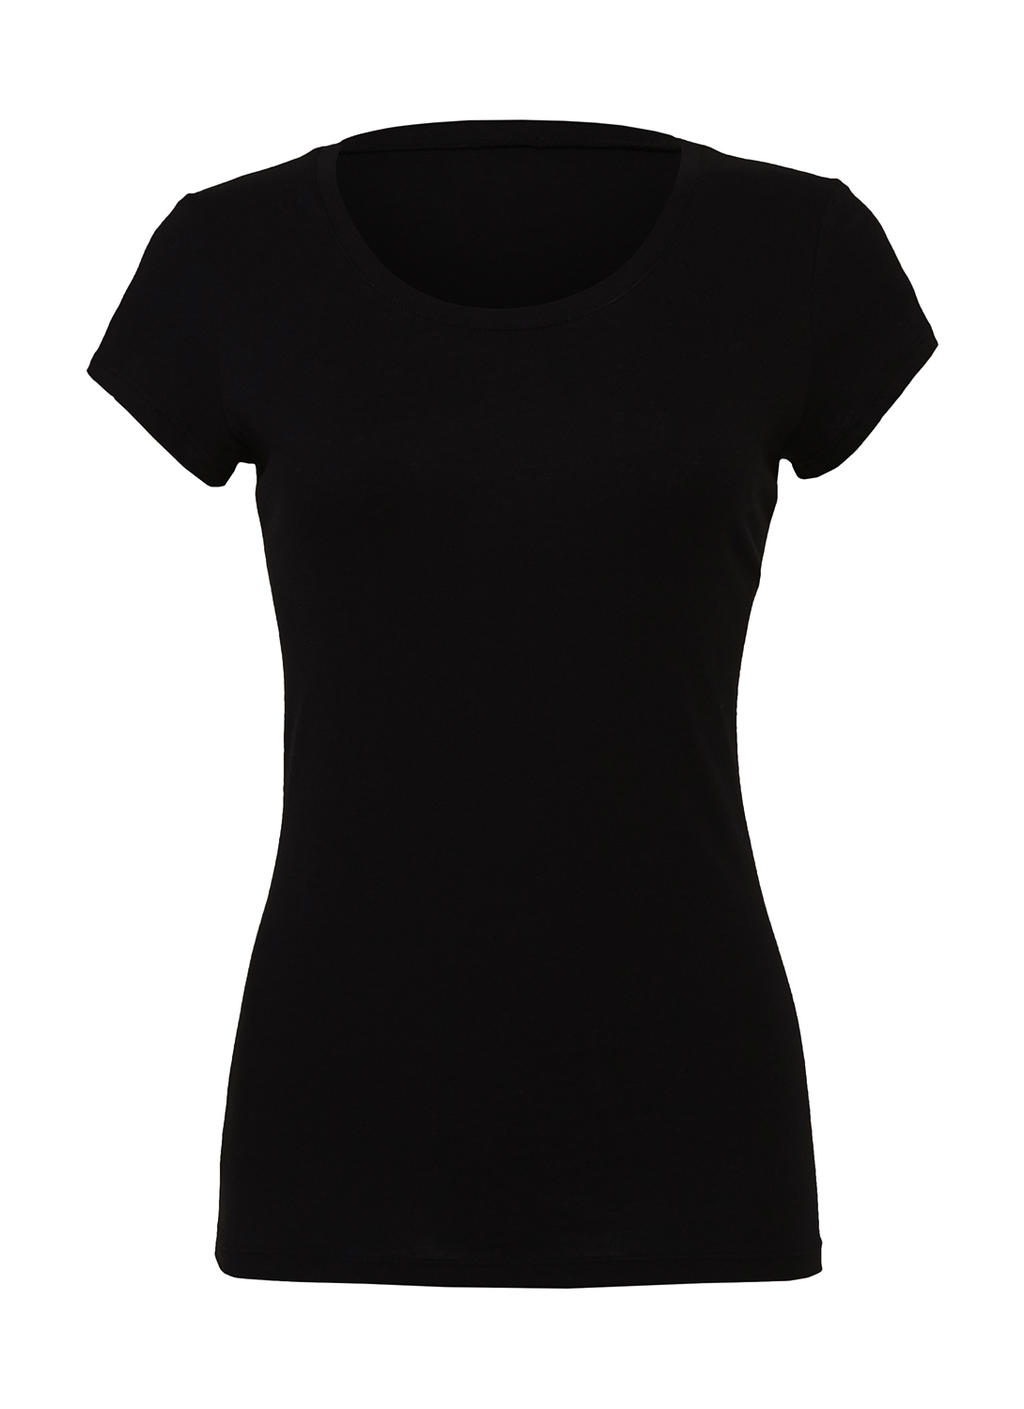  The Favorite T-Shirt in Farbe Black